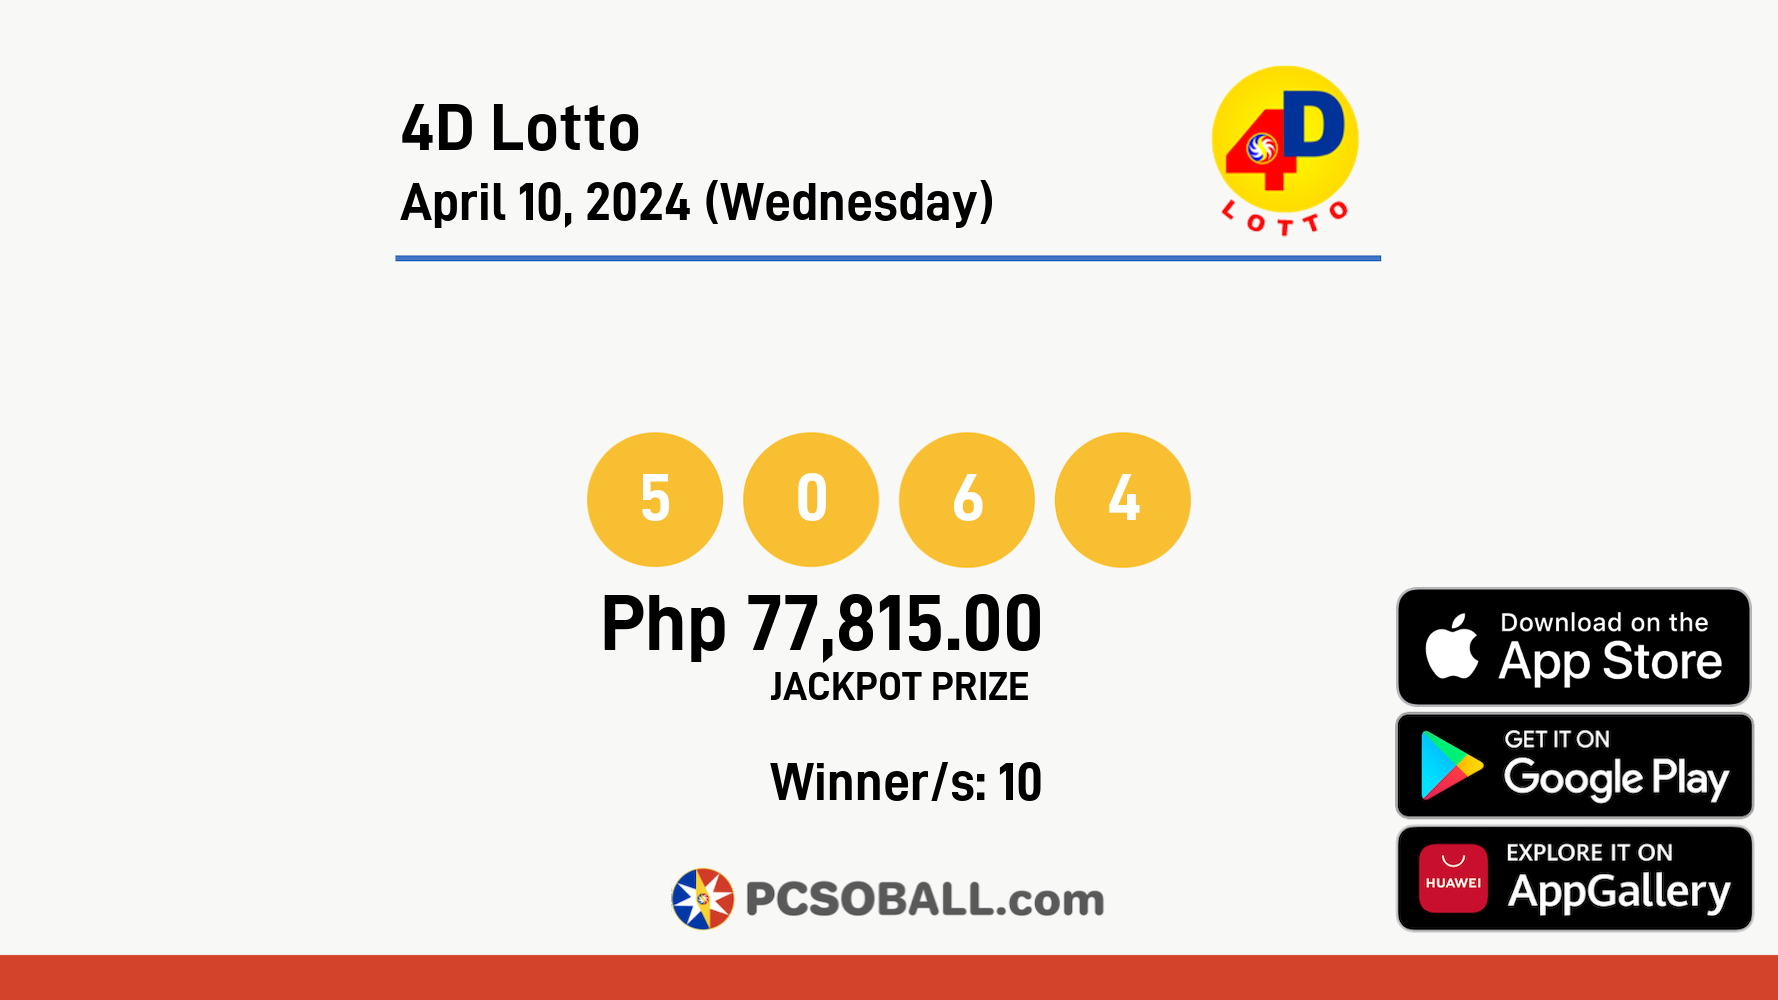 4D Lotto April 10, 2024 (Wednesday) Result